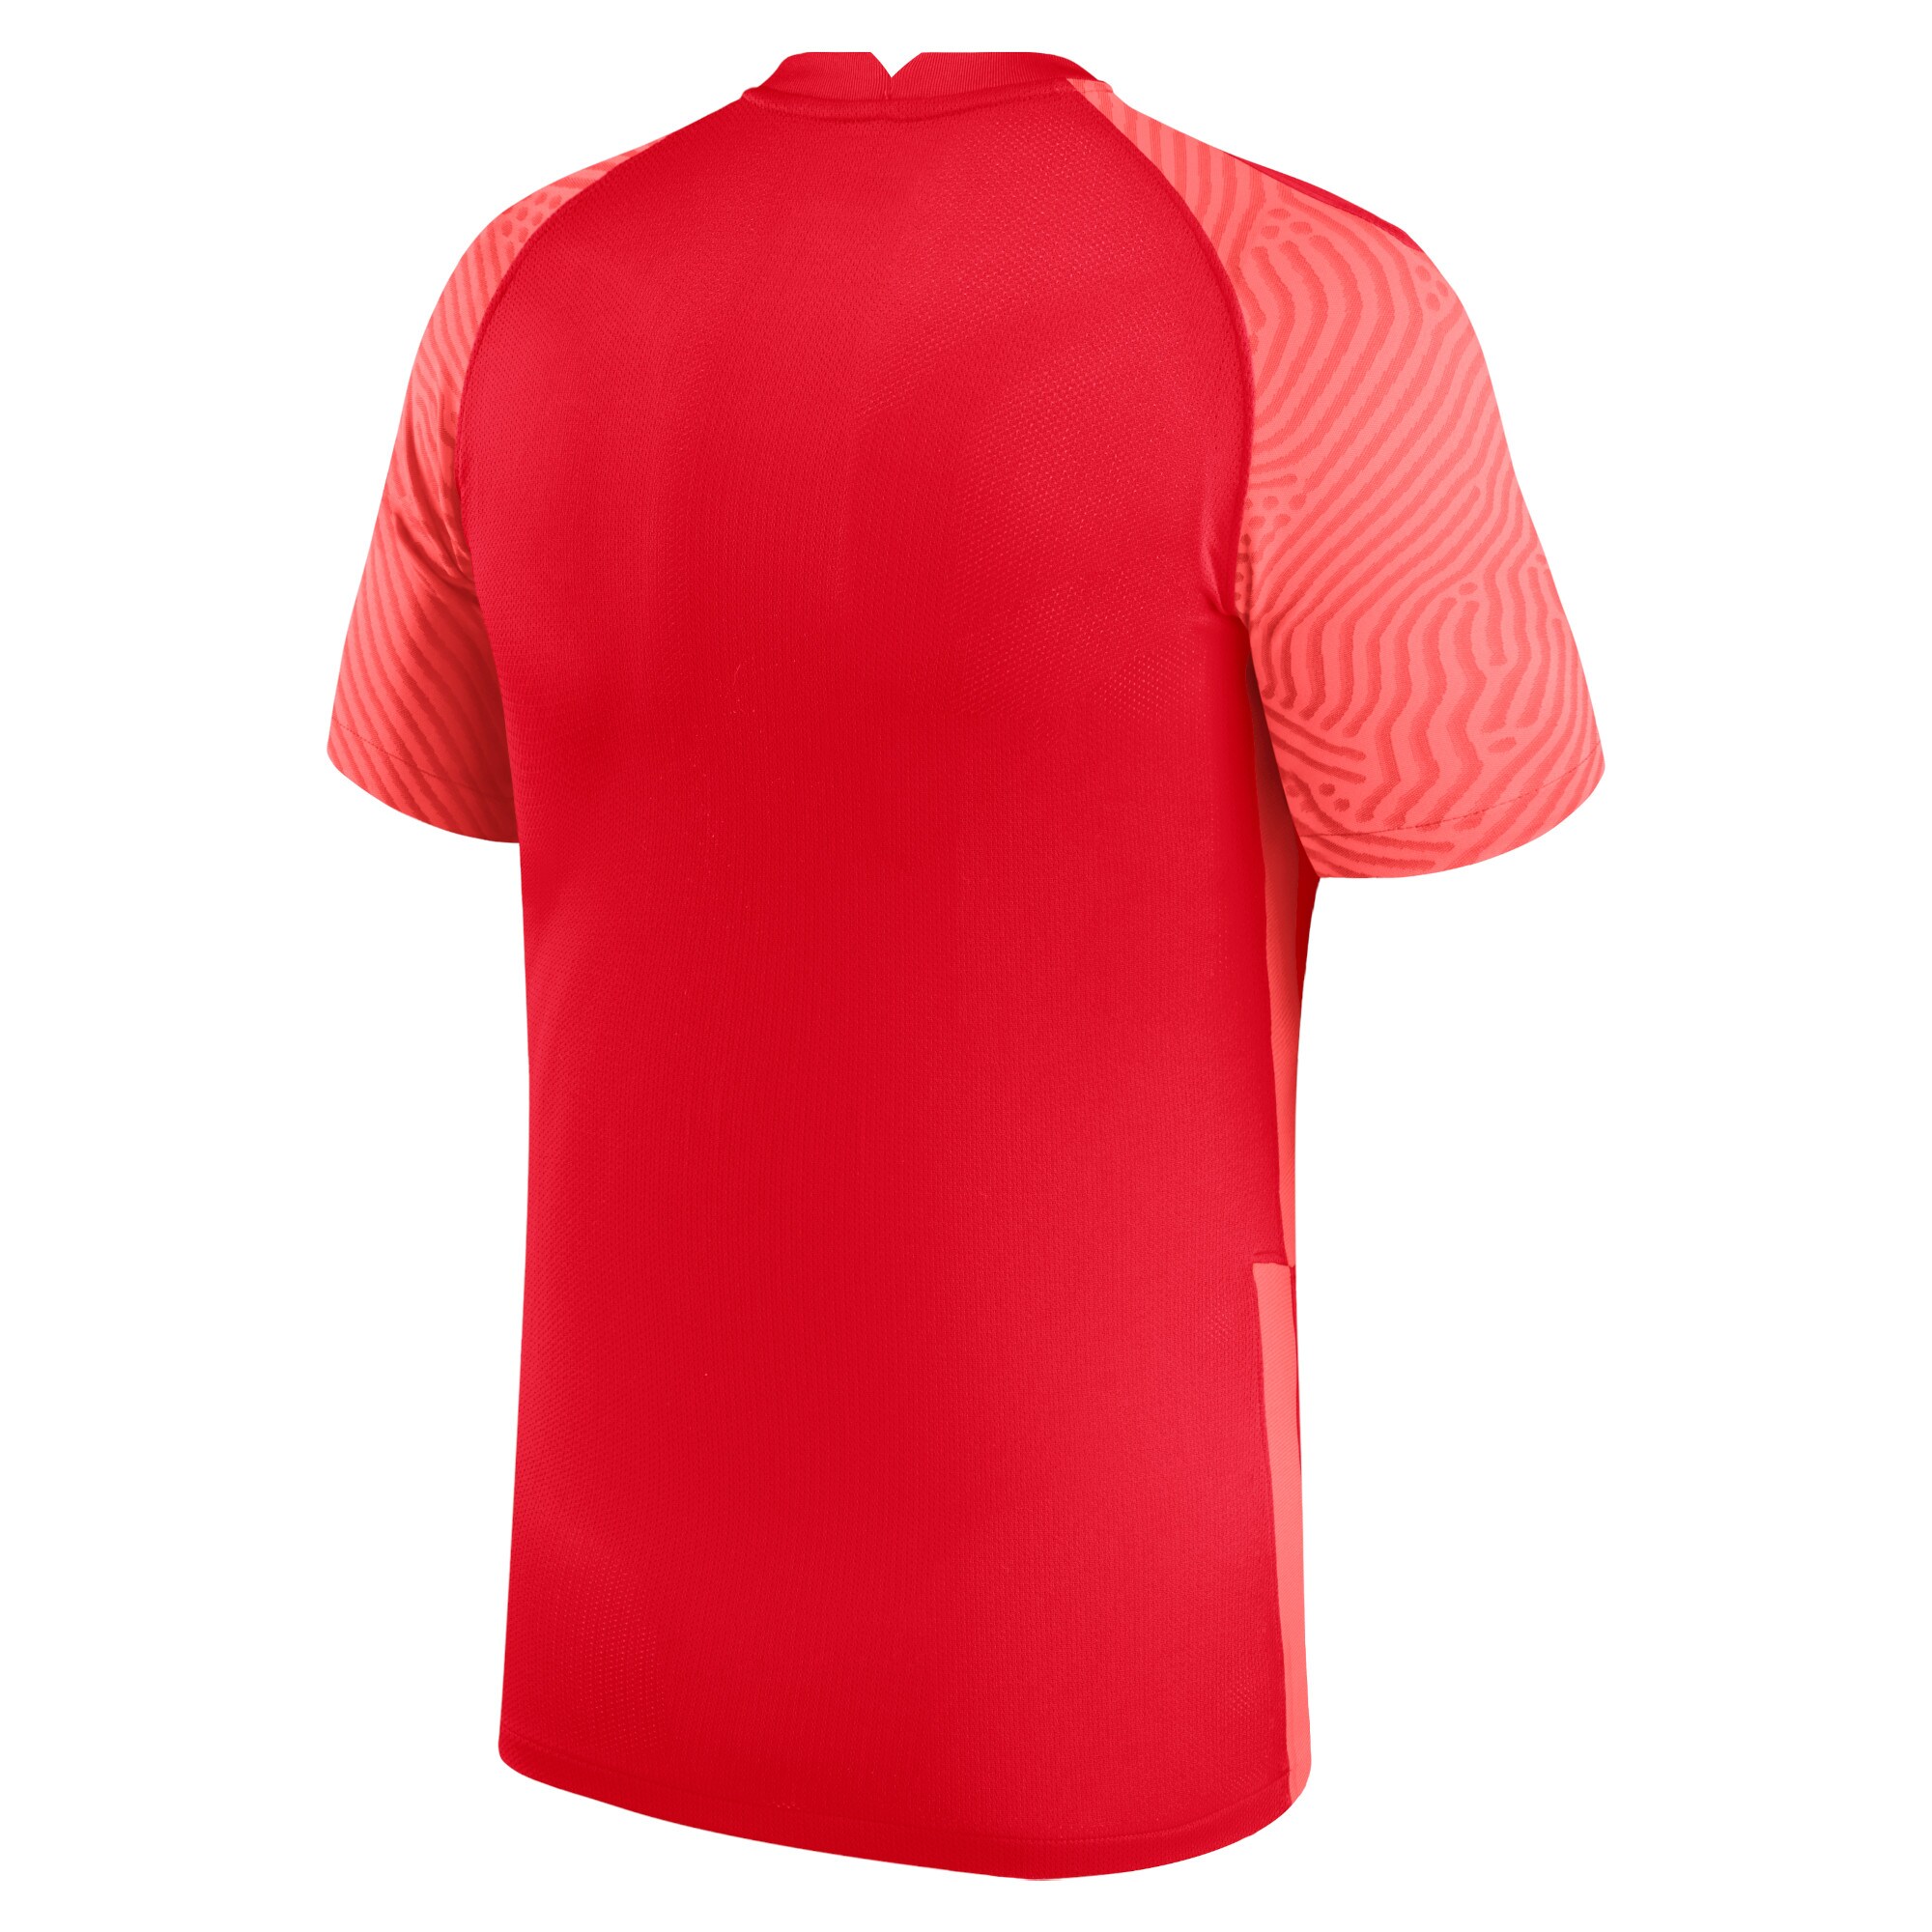 Canada Soccer Home Jersey